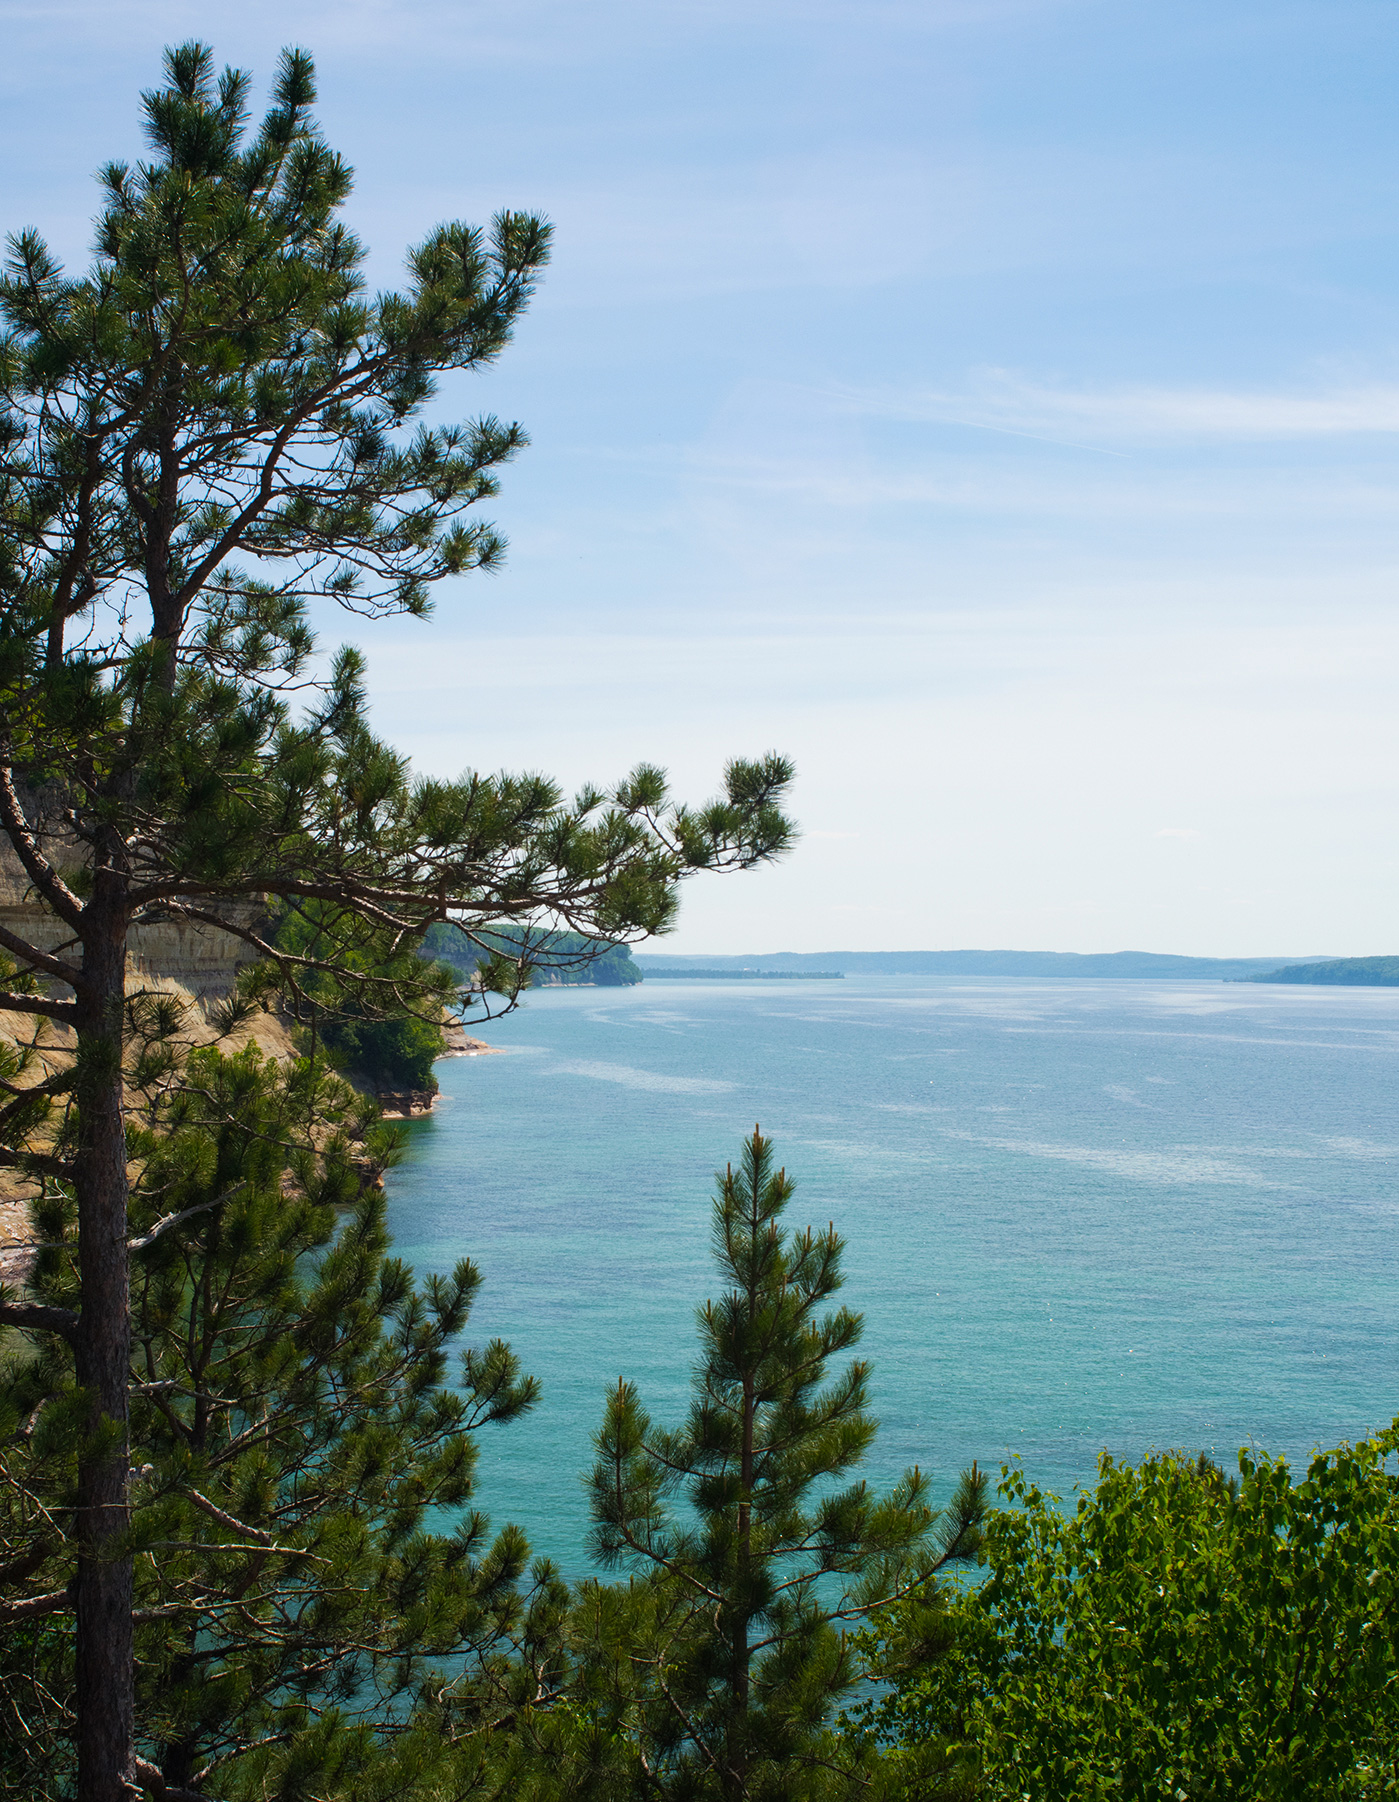 The turquoise coastline of Pictured Rocks, MI is framed by trees.